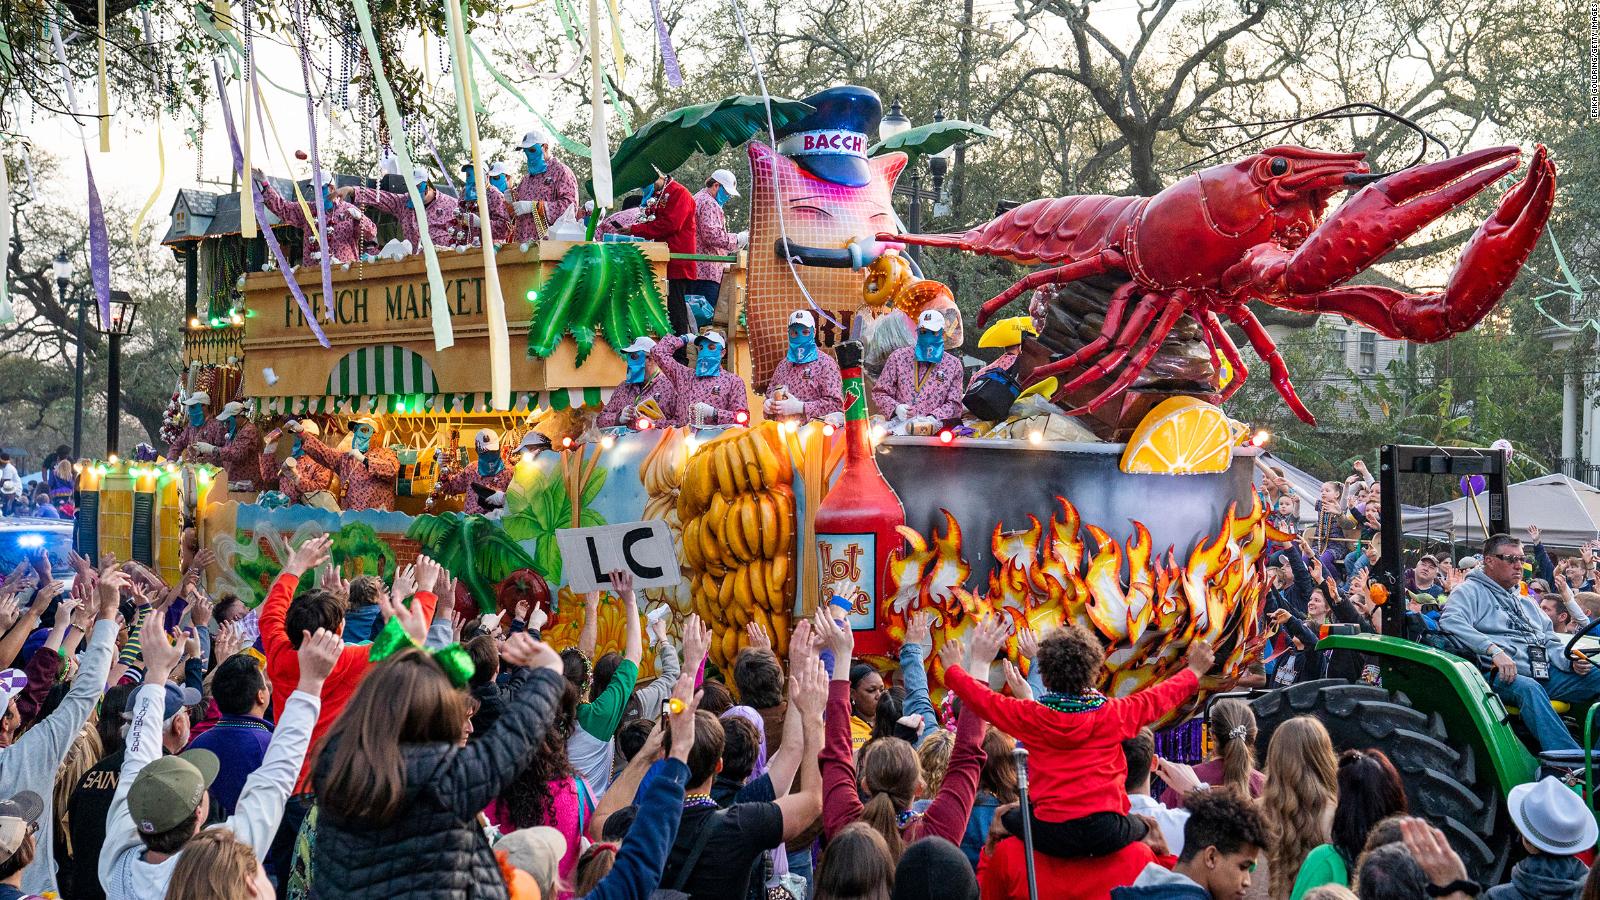 Due to Covid19, Mardi Gras parades are canceled in New Orleans next